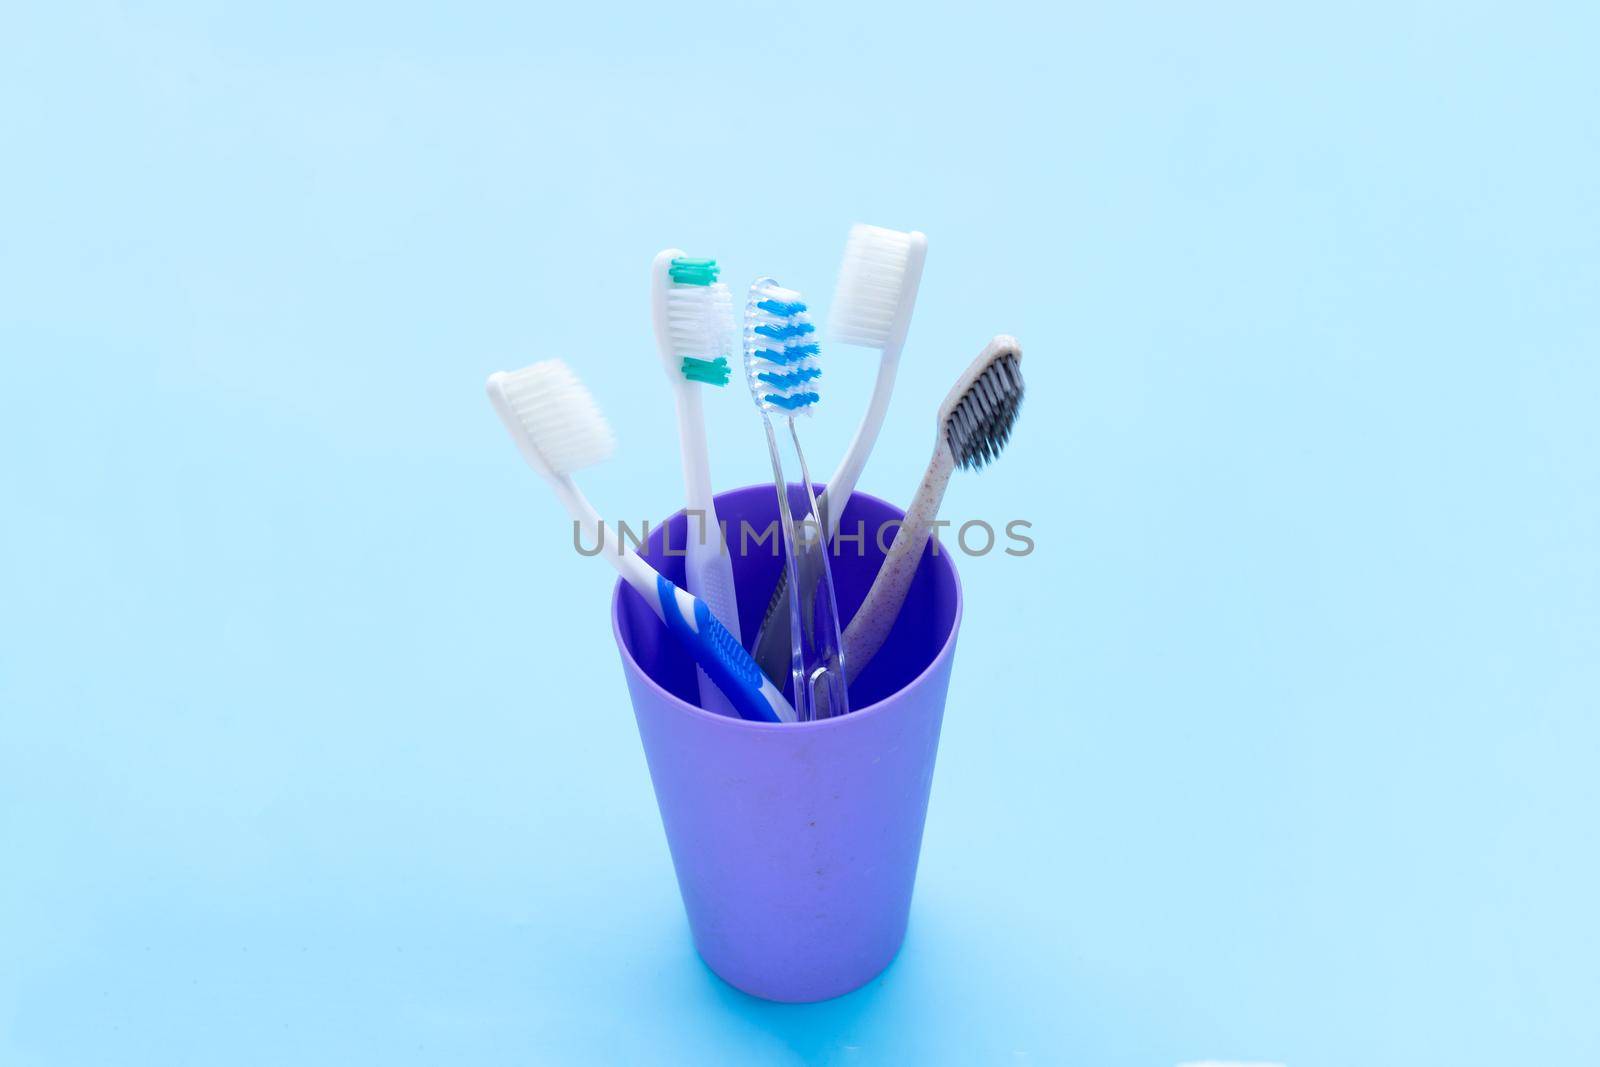 Toothbrushes in plastic glass on blue background. Copy space